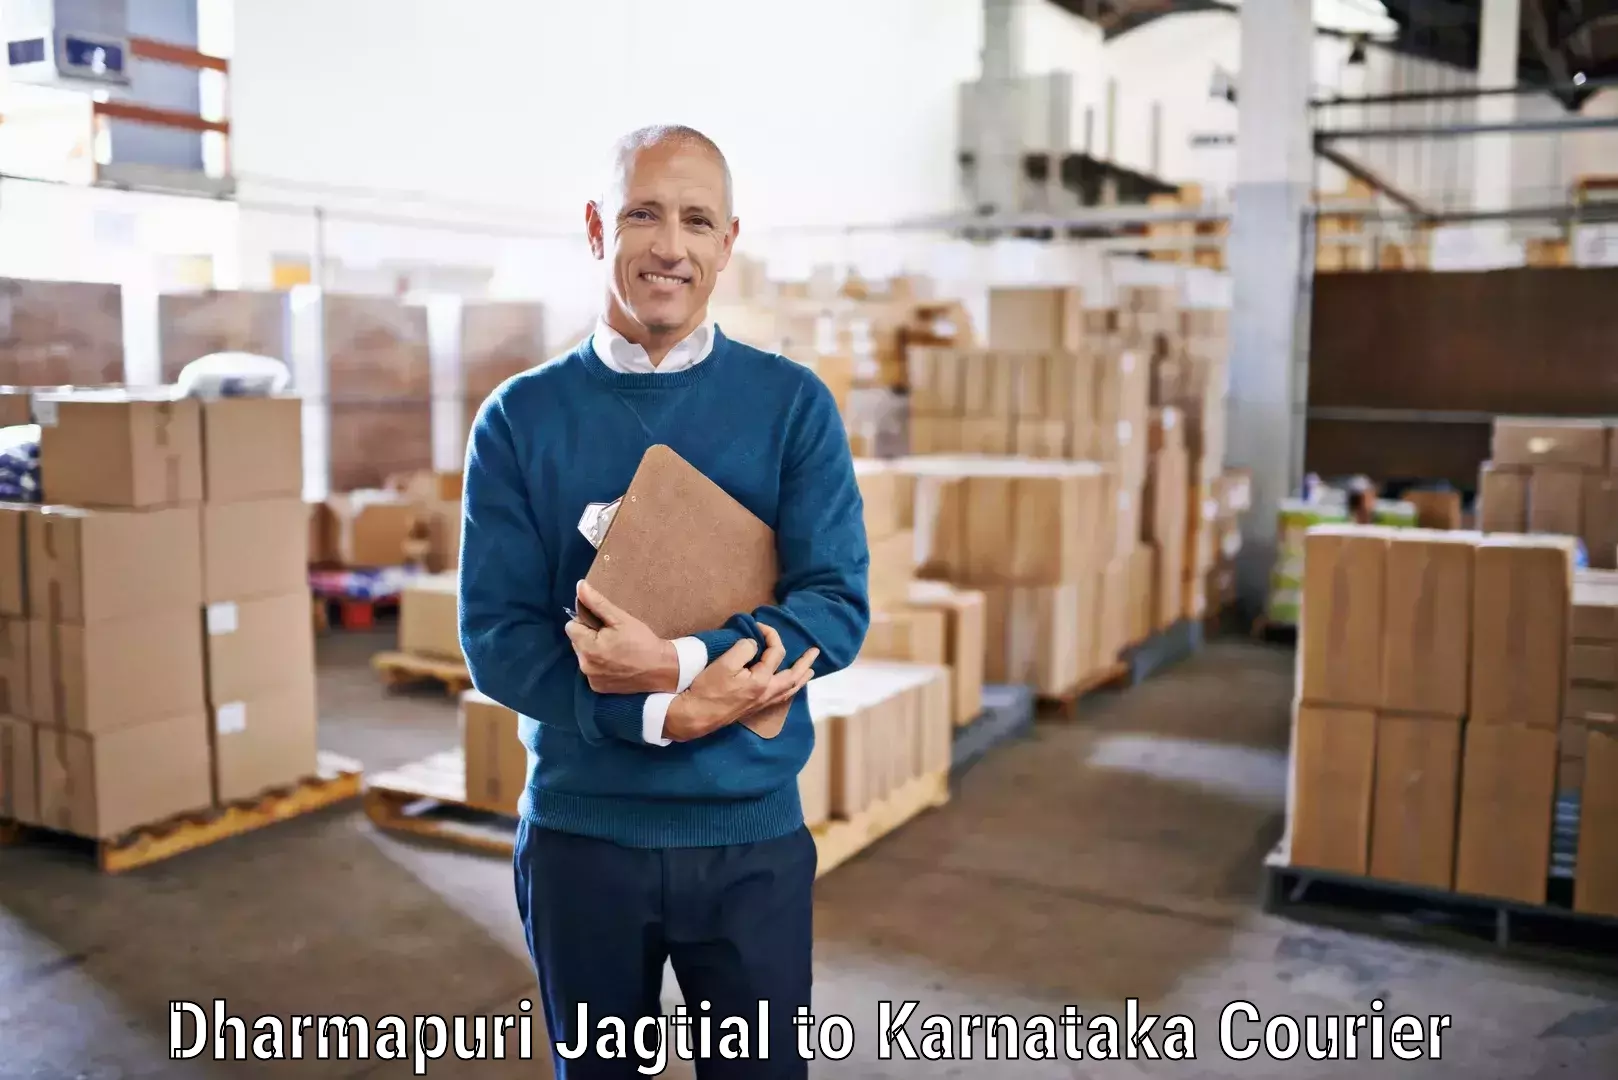 24/7 shipping services in Dharmapuri Jagtial to Nelamangala